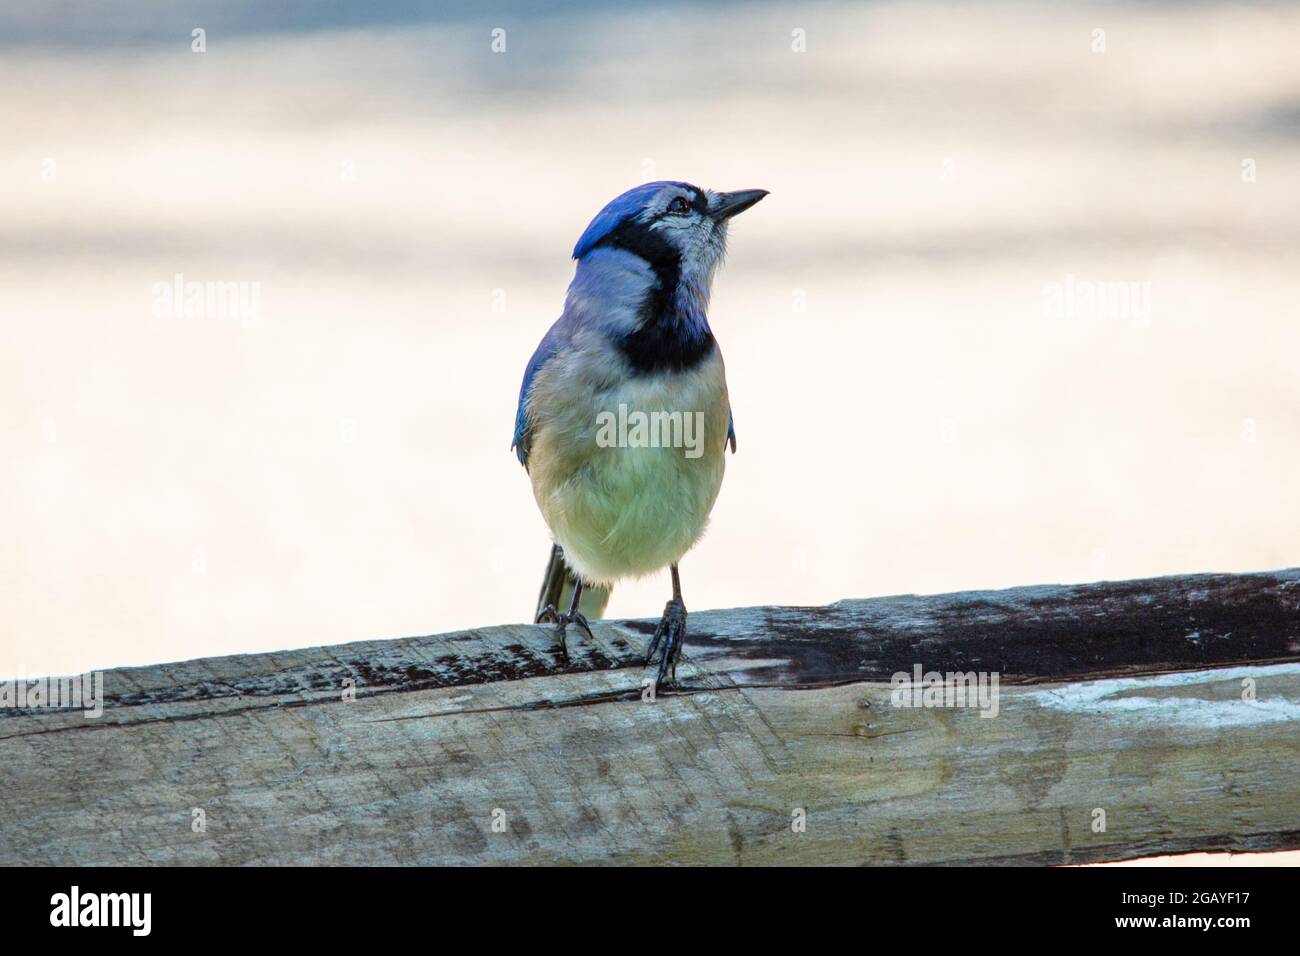 A Blue Jay (Cyanocitta cristata) is perched on a wooden fence. Stock Photo